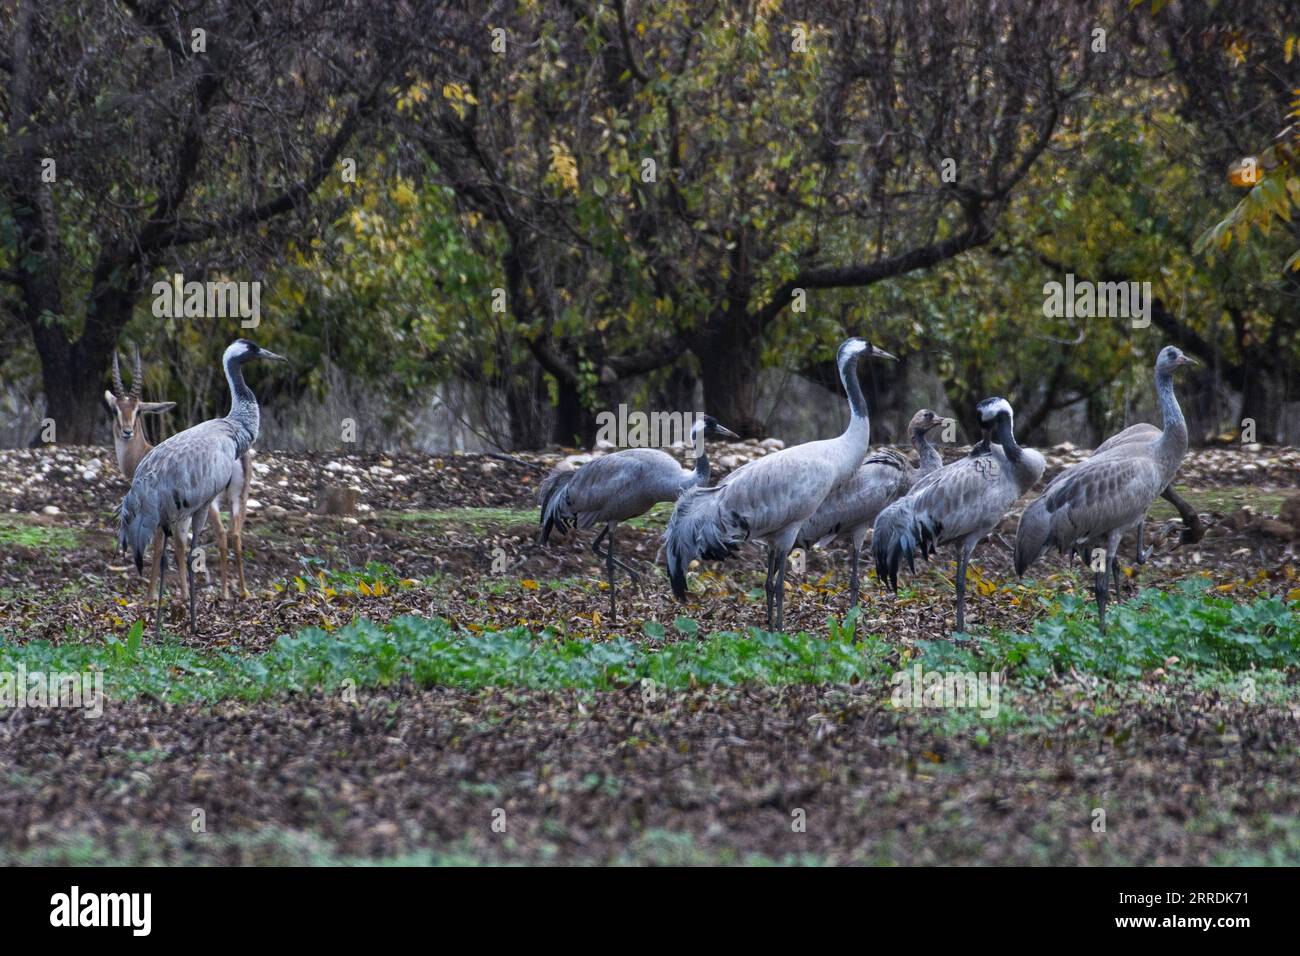 211230 -- HULA VALLEY, Dec. 30, 2021 -- A flock of cranes are seen in the Hula Valley in northern Israel, on Dec. 30, 2021. The Hula Nature Reserve and Hula Lake park have been closed to the public to prevent the spread of pathogenic H5N1 avian influenza, according to local media.  via Xinhua ISRAEL-HULA VALLEY-BIRD FLU AyalxMargolin/JINI PUBLICATIONxNOTxINxCHN Stock Photo